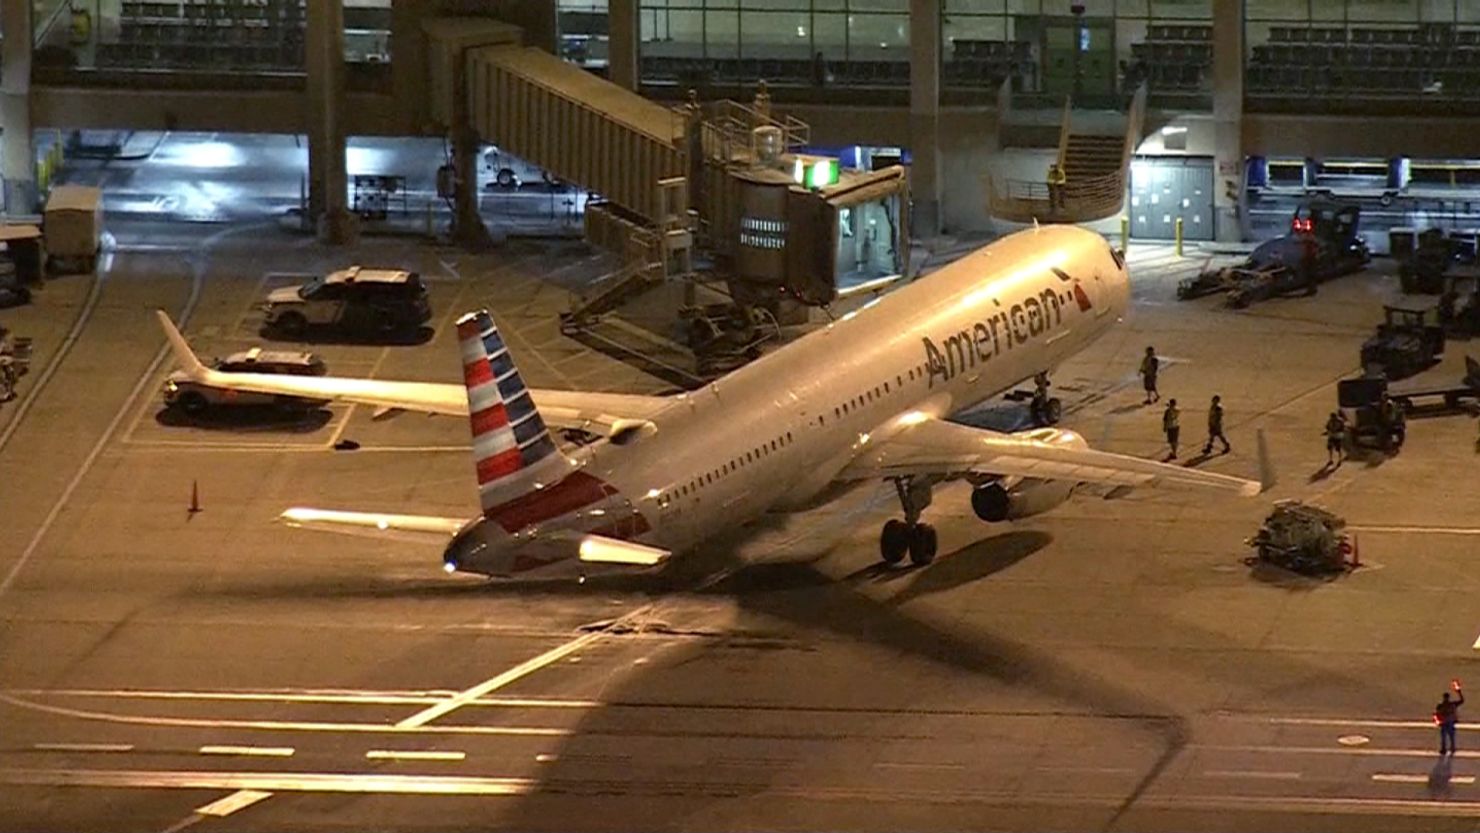 American Airlines flight 976 was diverted to Denver, Colorado, after the incident.